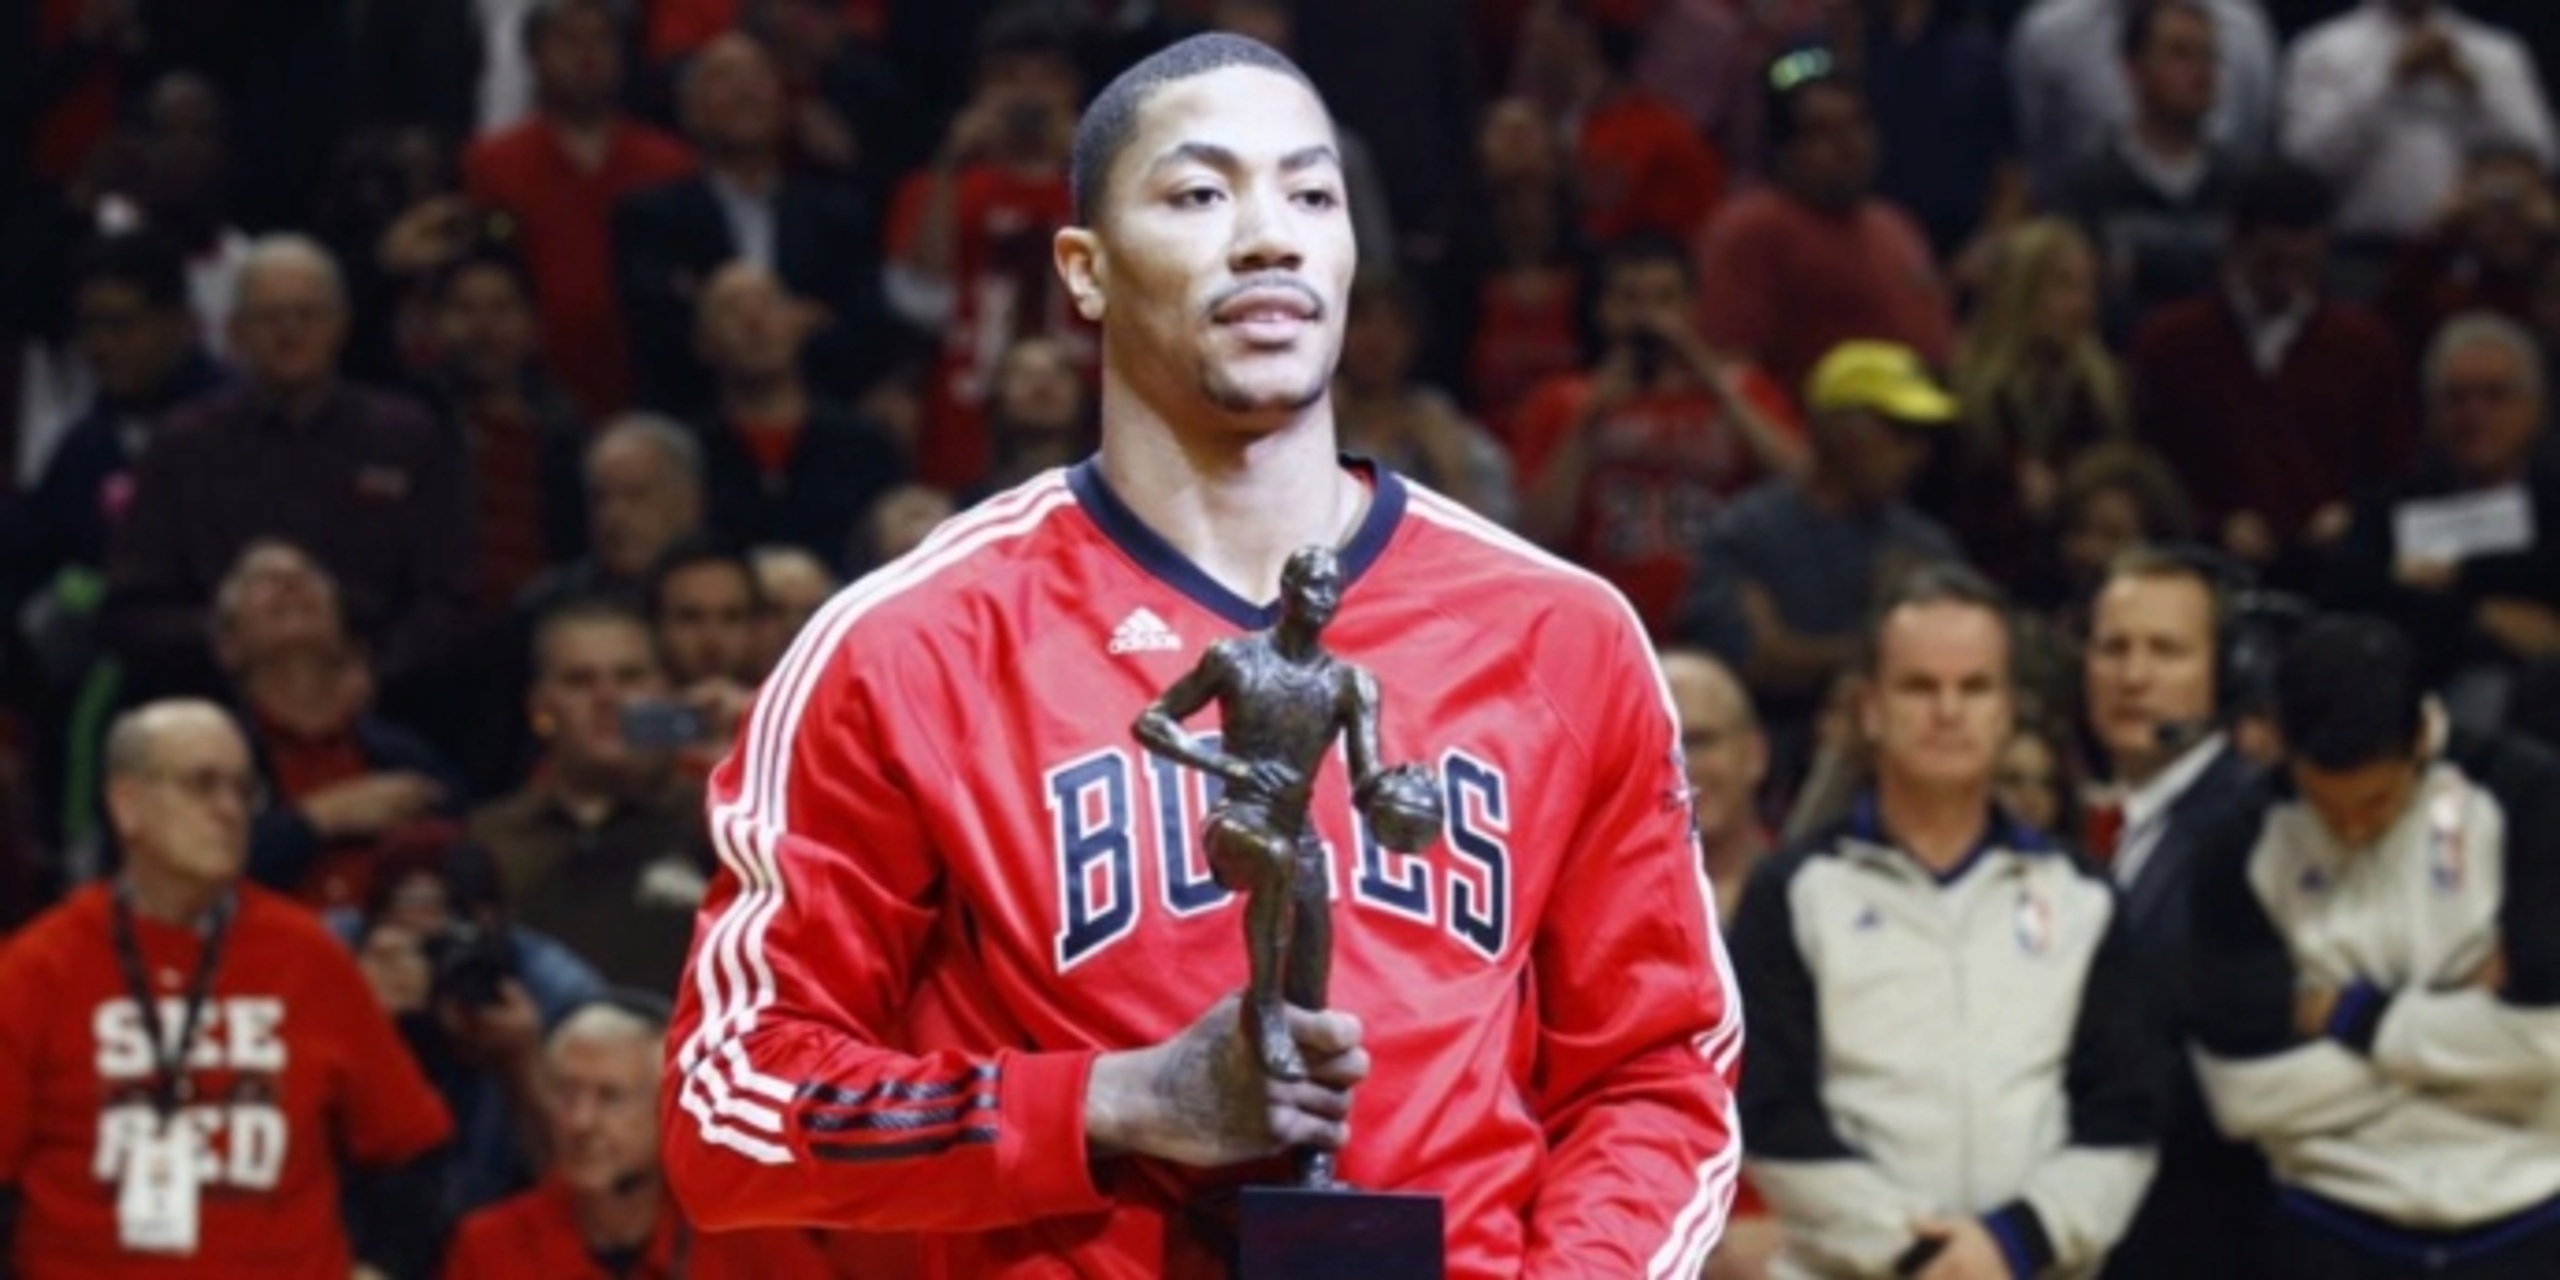 Derrick Rose’s MVP trophy is still with his mom